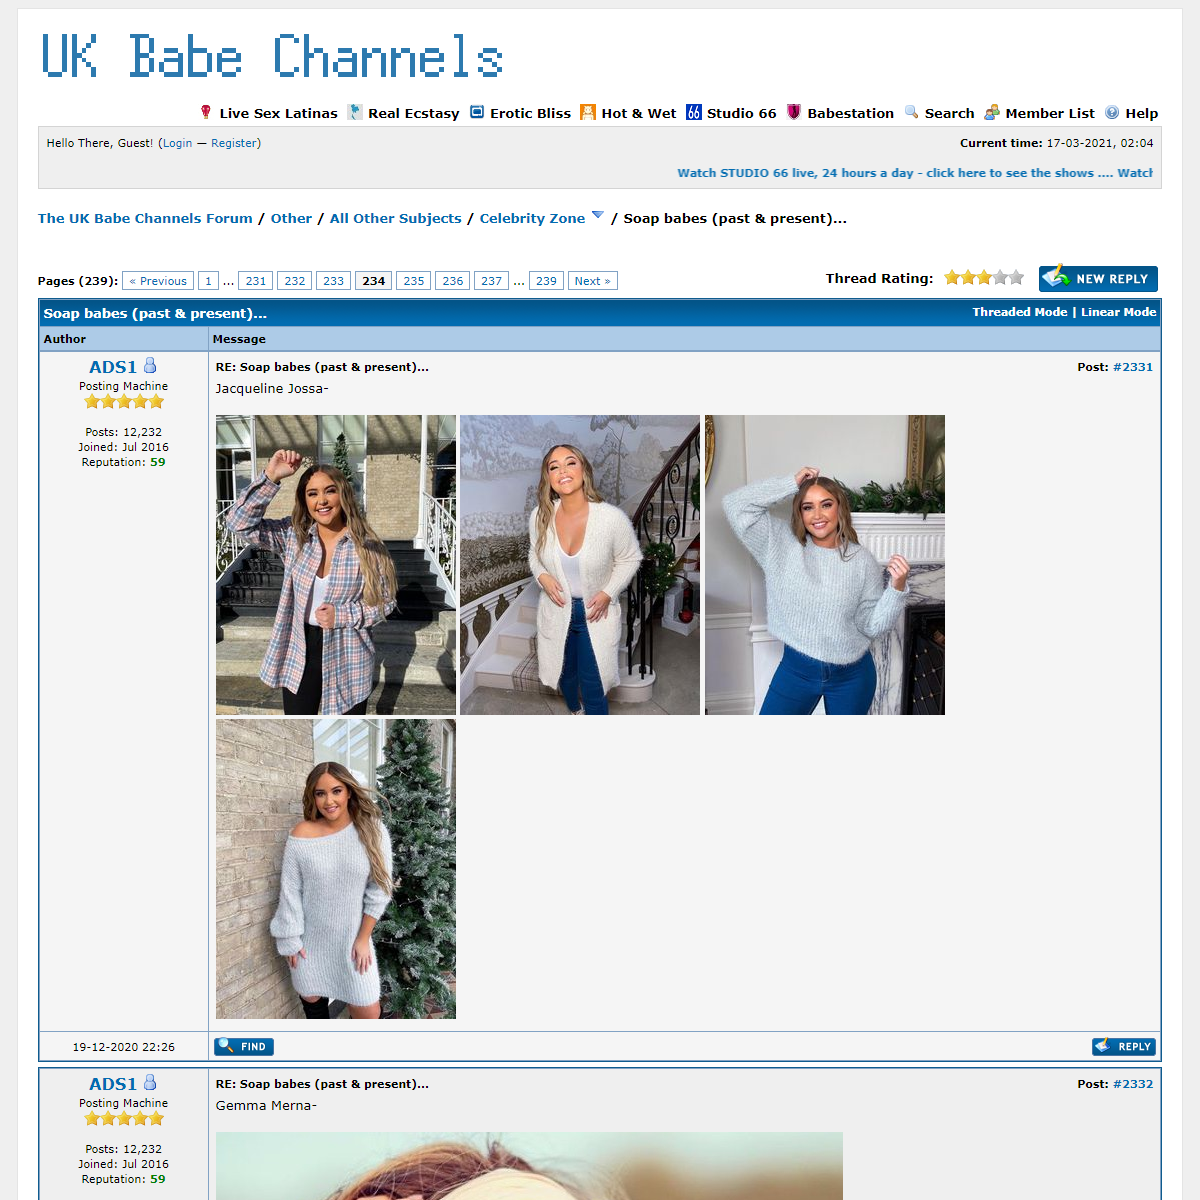 A complete backup of https://www.babeshows.co.uk/showthread.php?tid=840&page=234